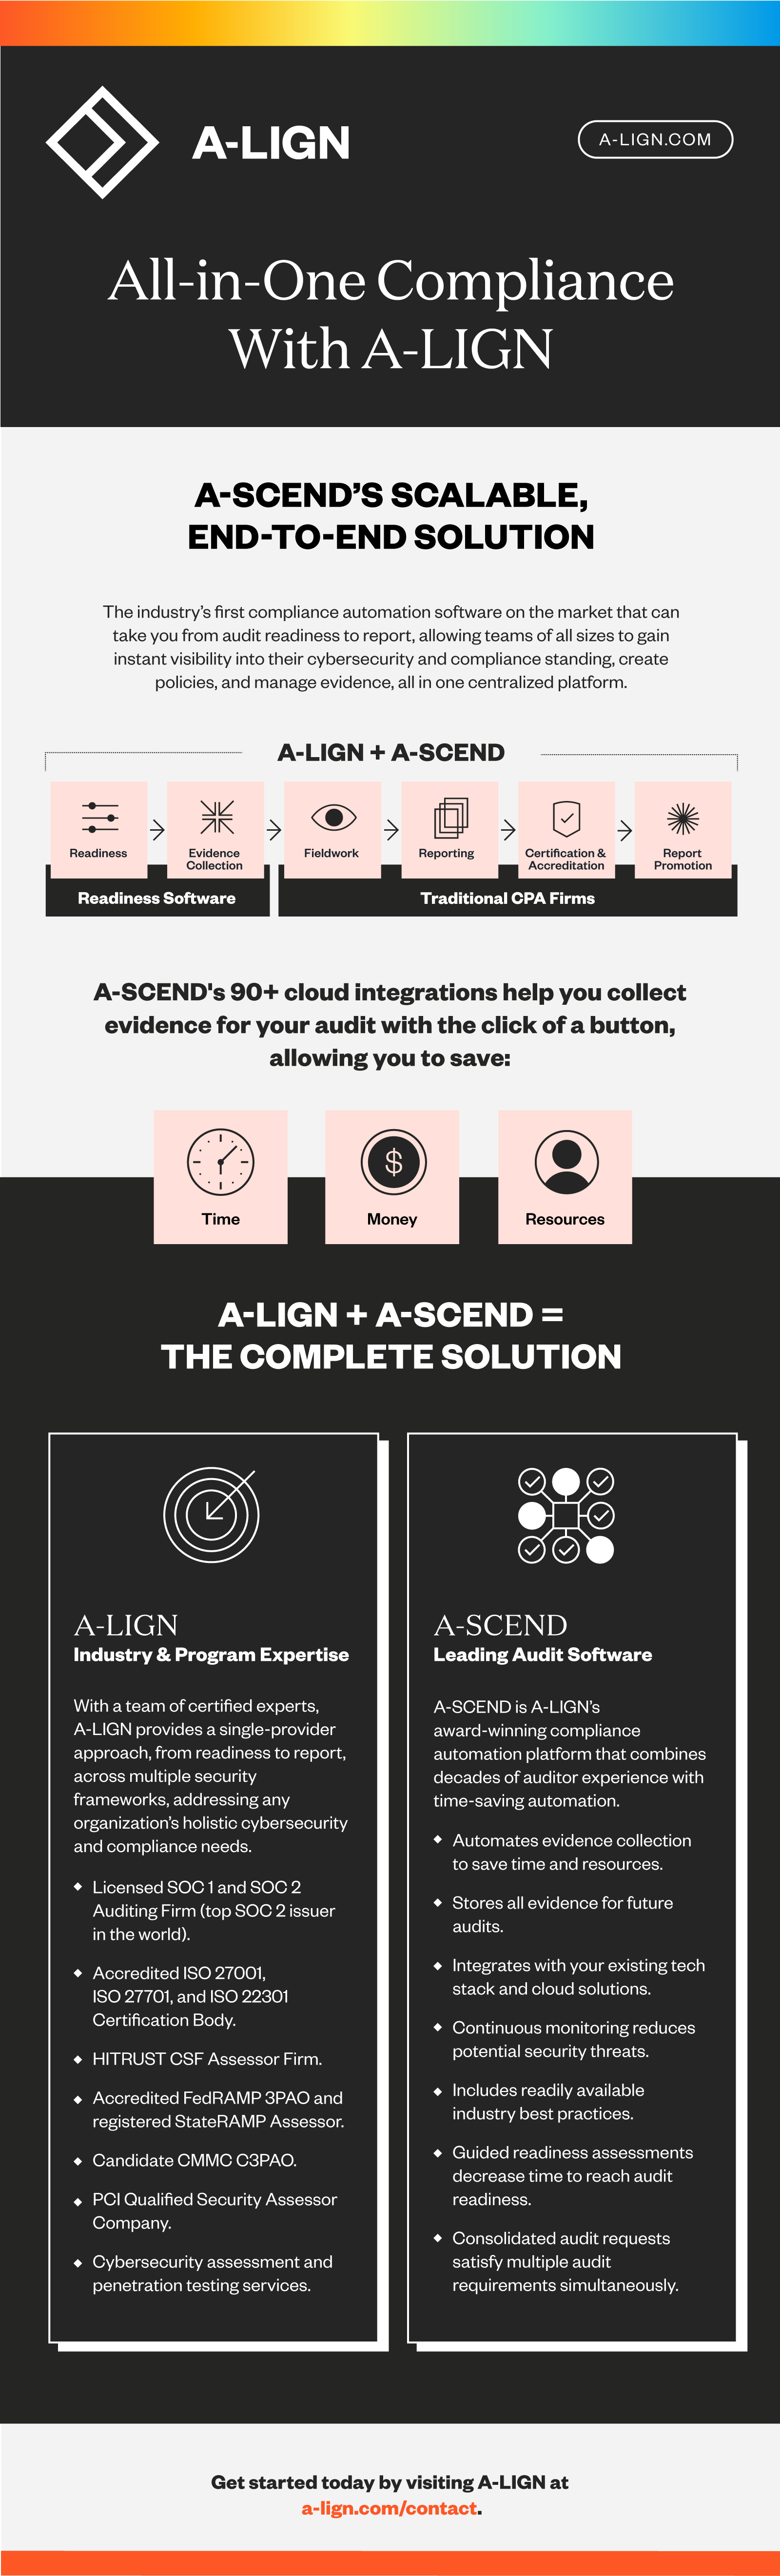 A-LIGN + A-SCEND = The Complete Solution 